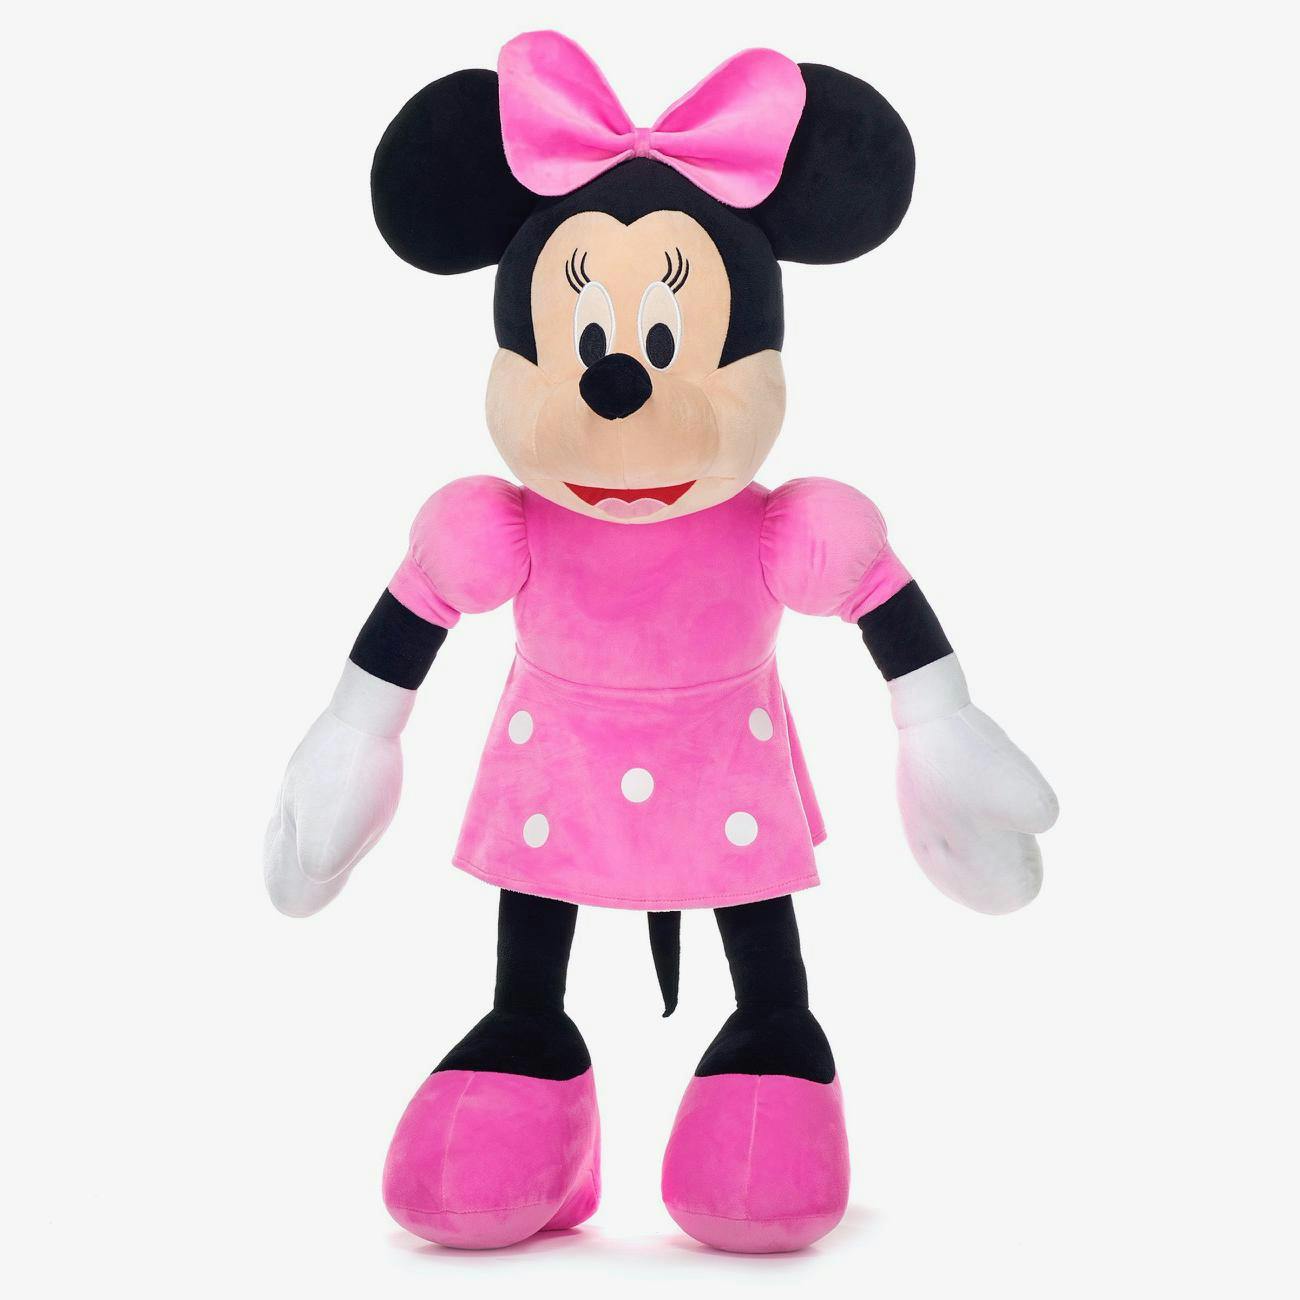 Product - Minnie Mouse